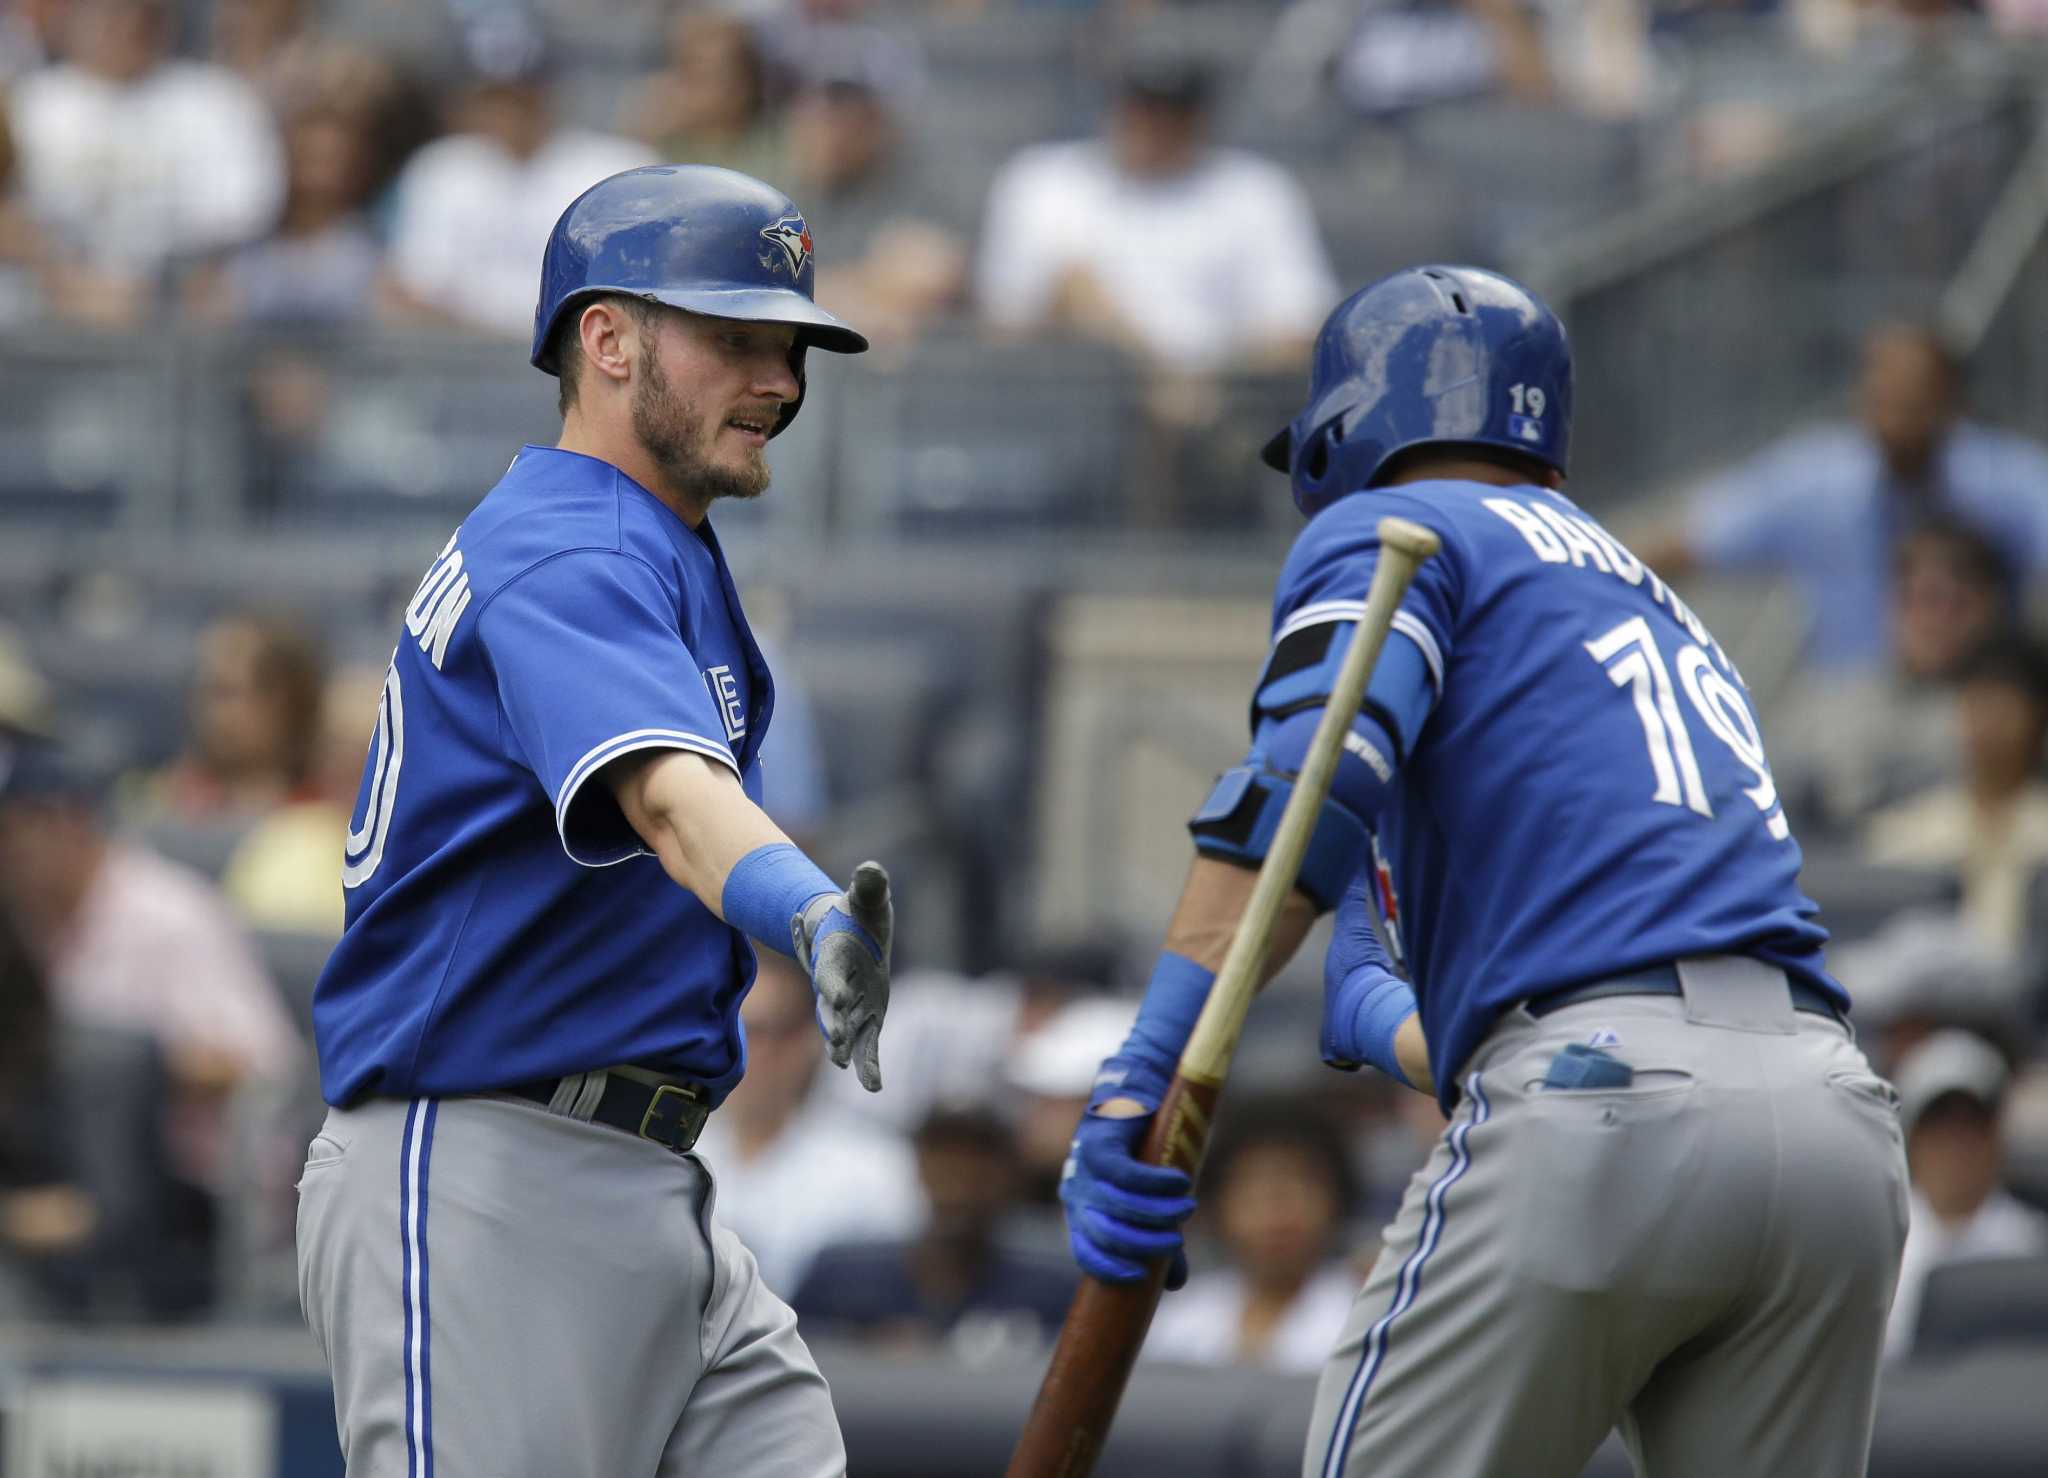 MLB investigating after Yankees' Donaldson accused of making